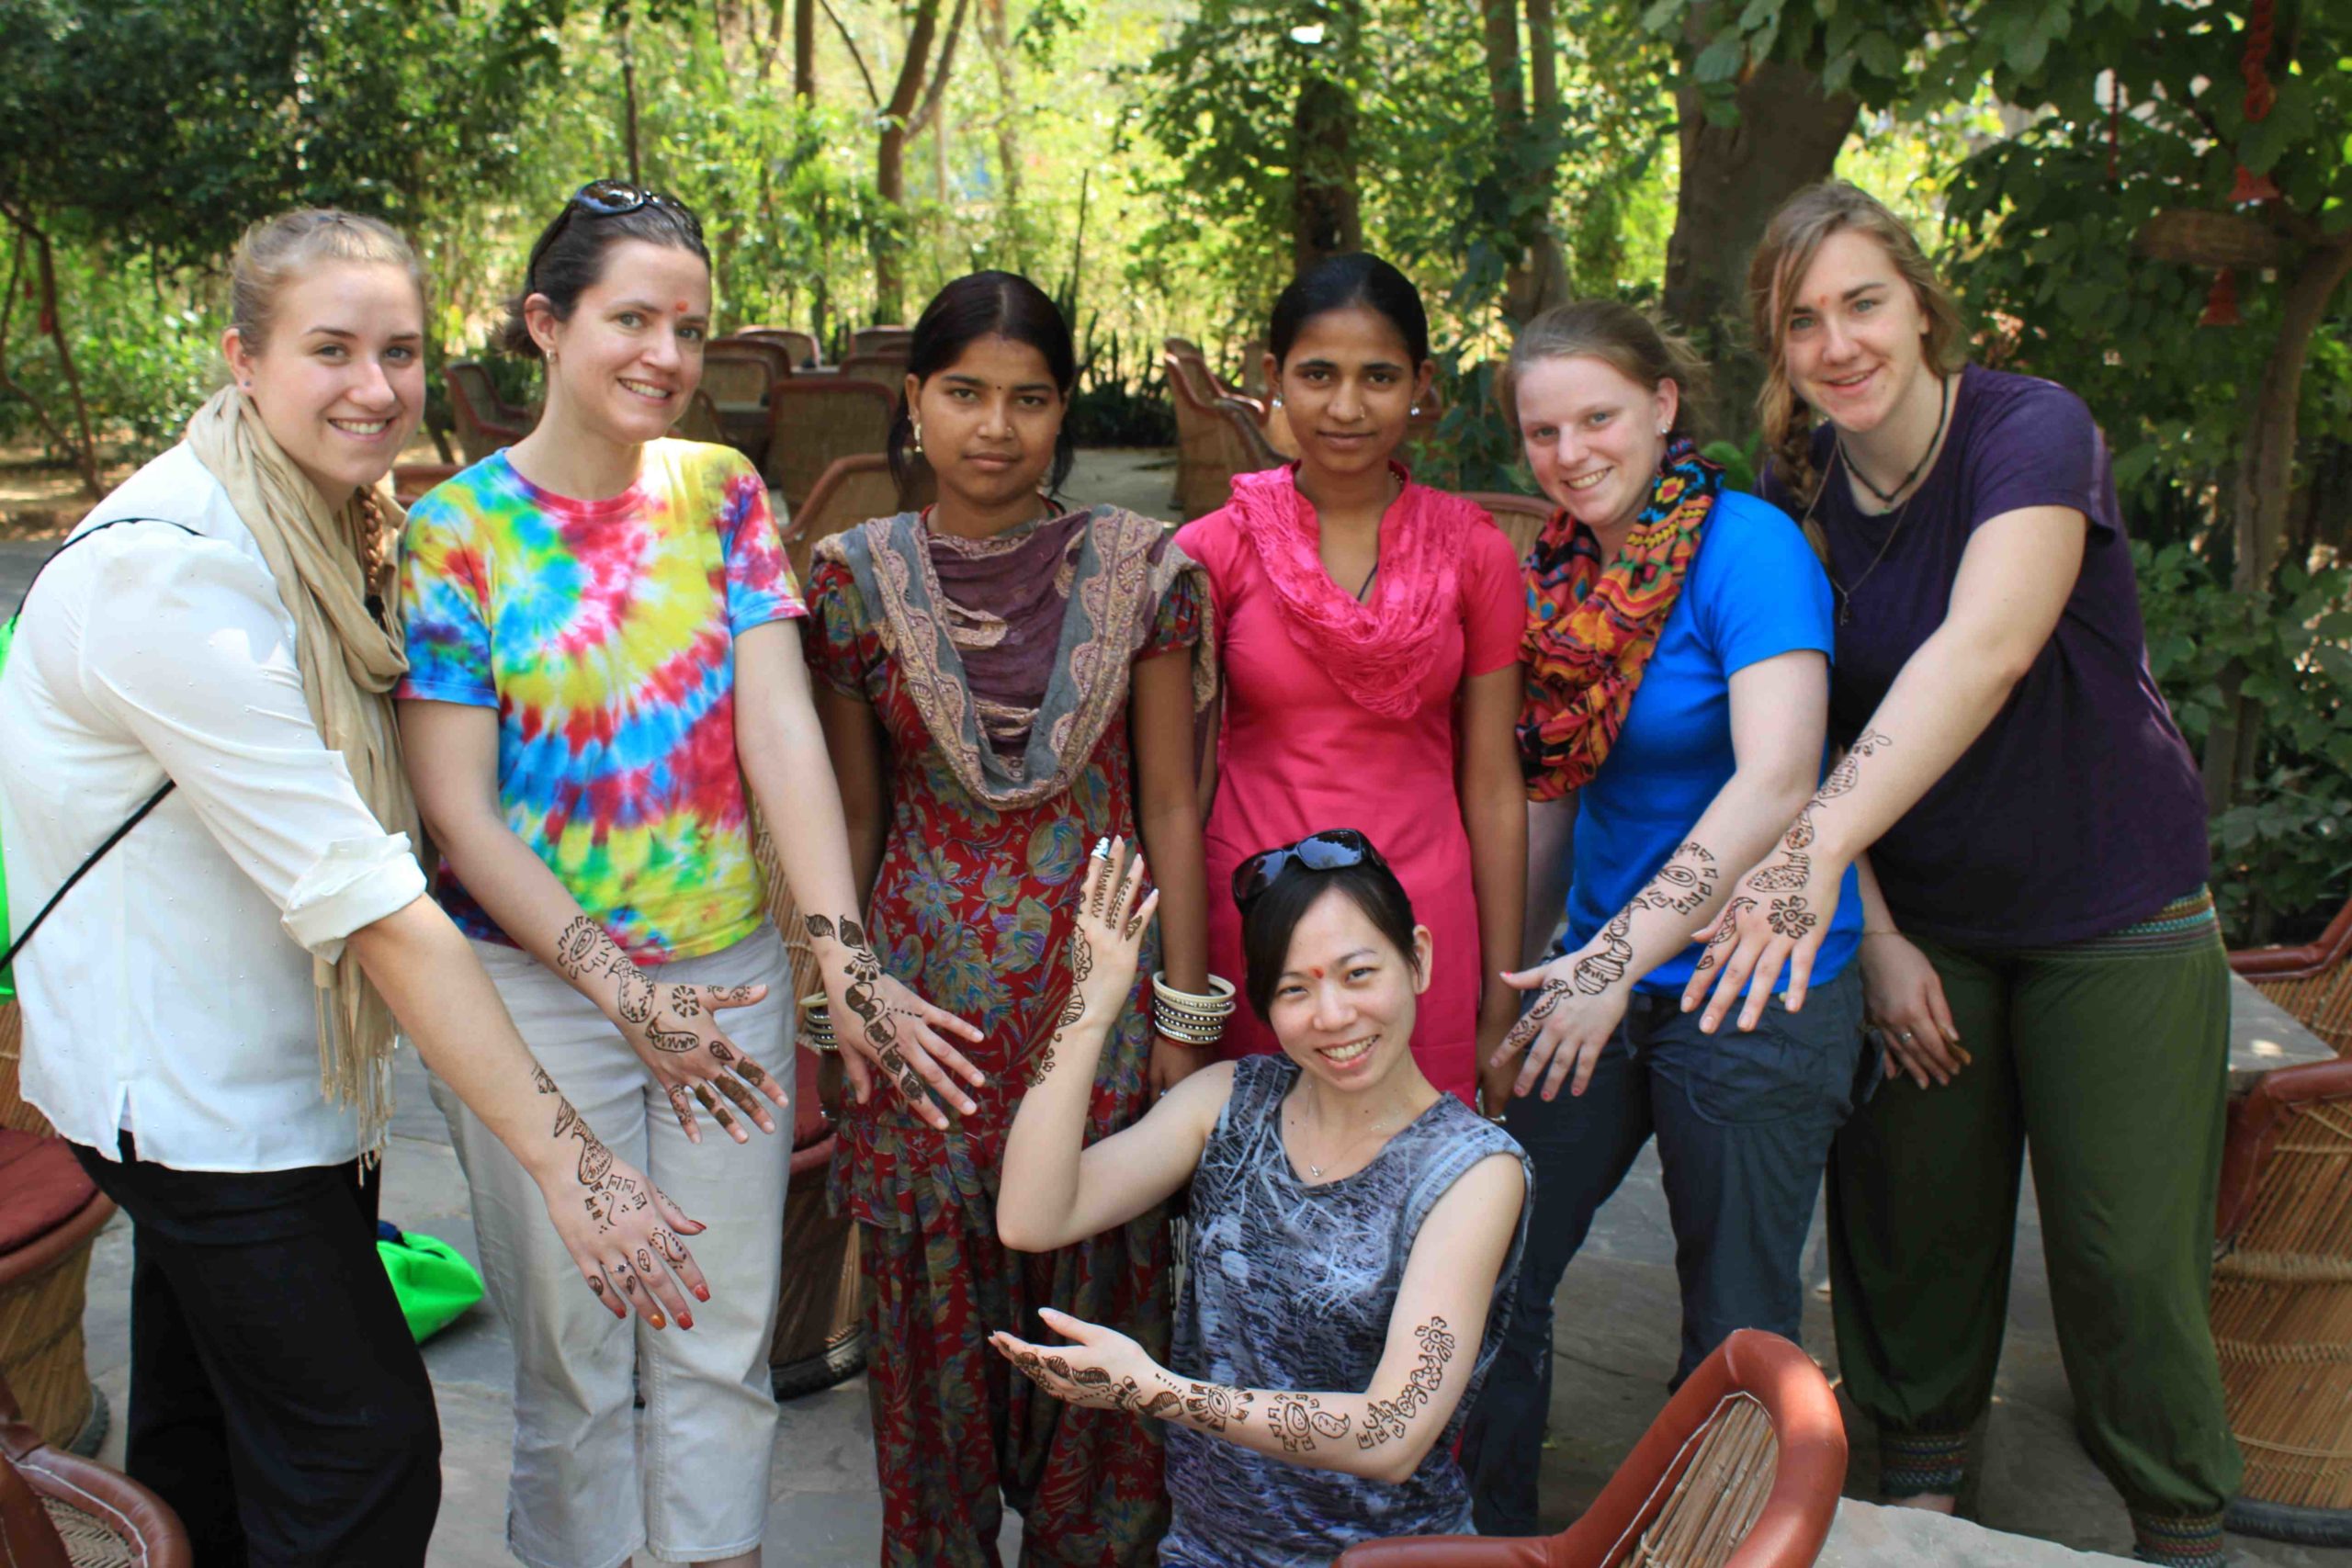 Students show off their henna tattoos during a Study Away trip to India